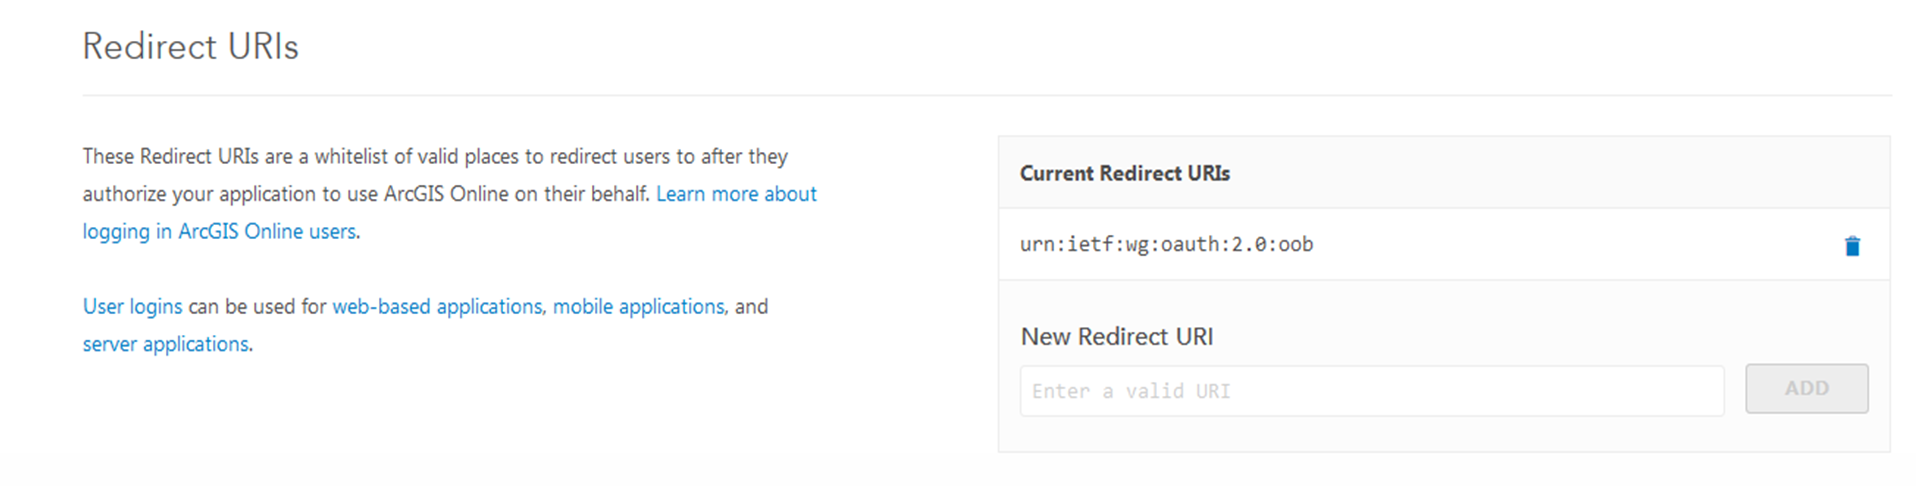 redirect_url.png